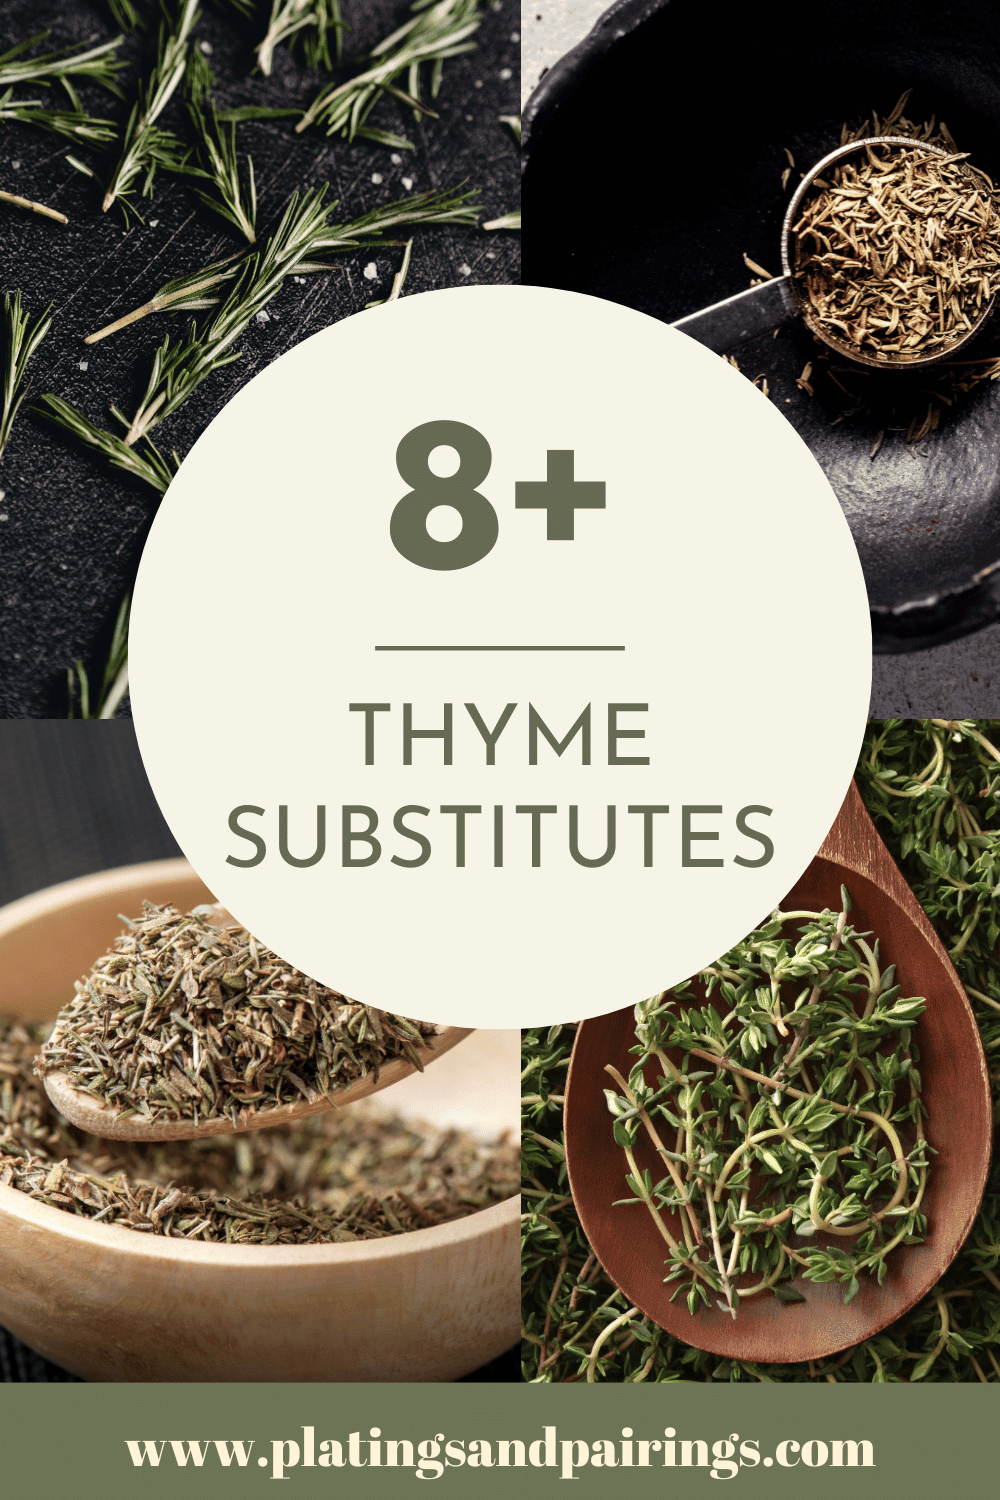 Collage of substitutes for thyme with text overlay.